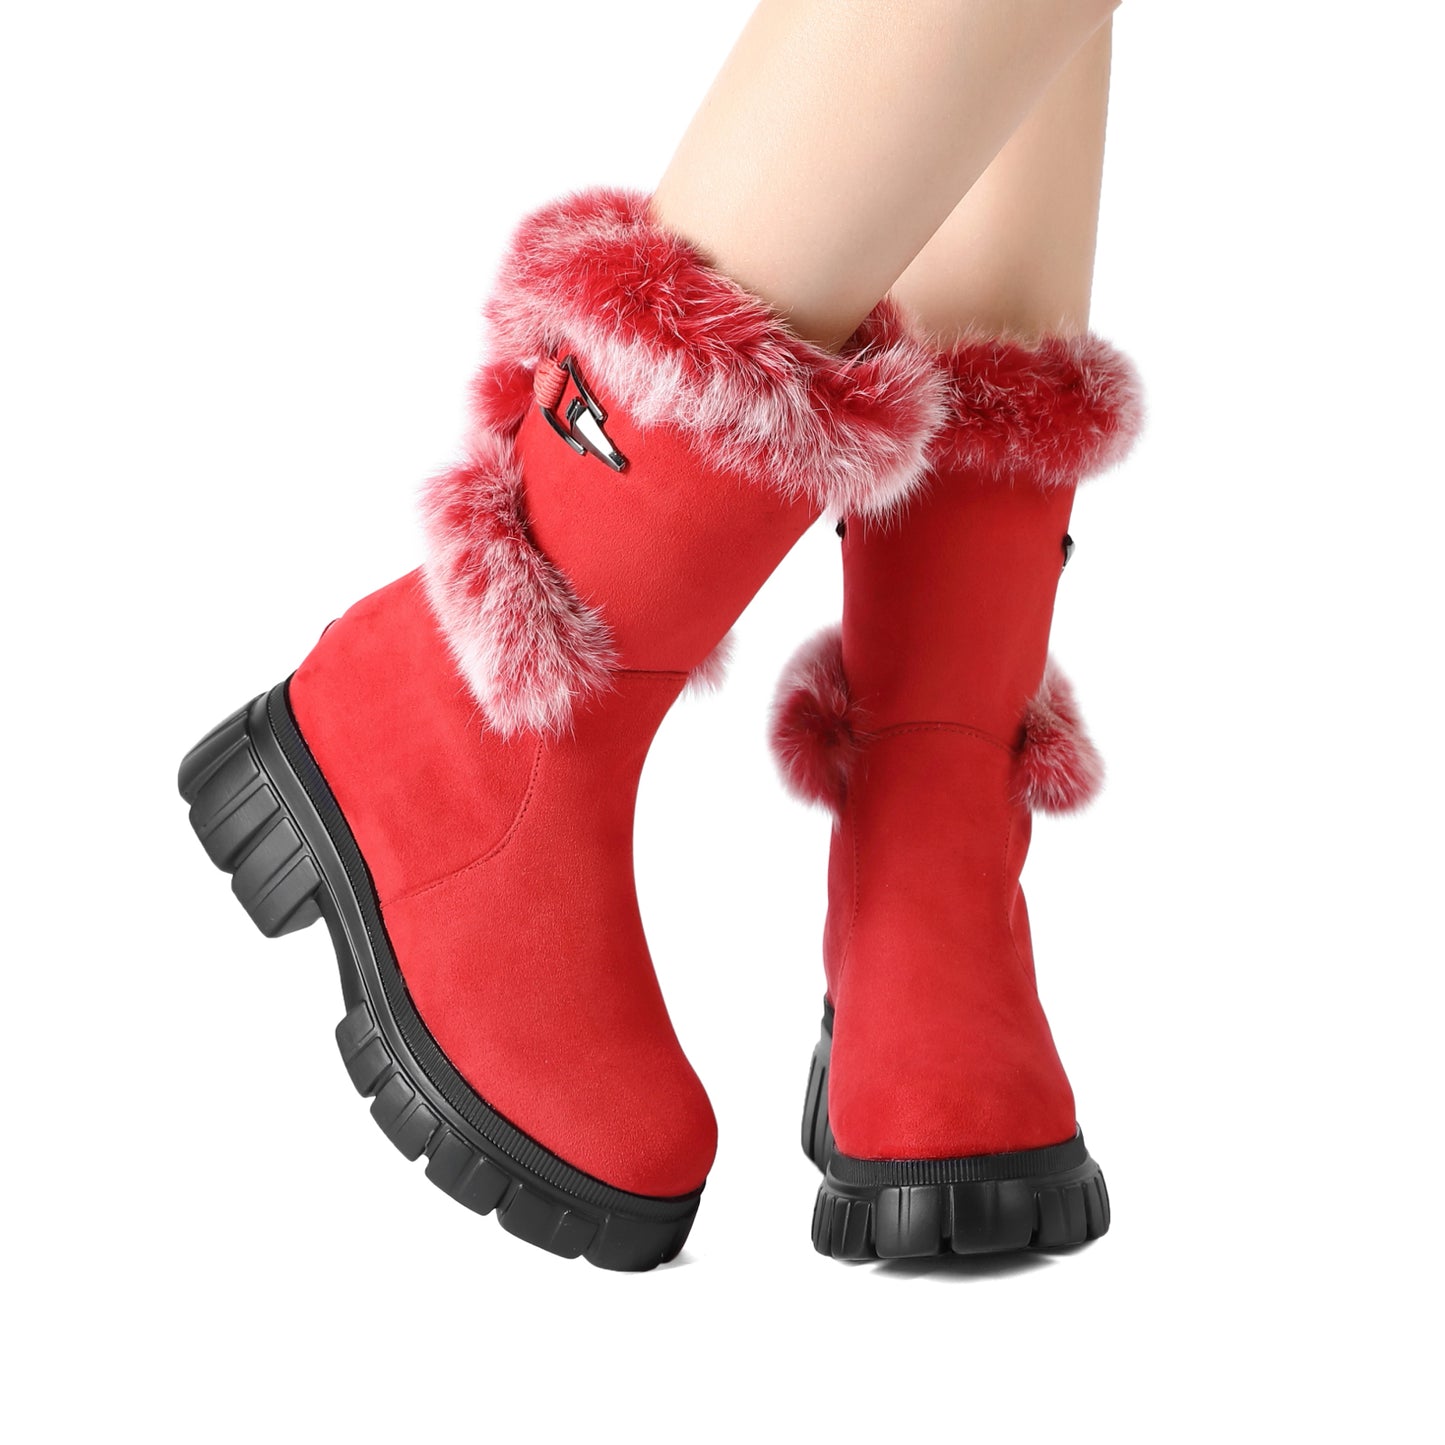 Women's Snow Ankle Boots with Genuine Rabbit Fur Sexy Furry Wedge Mid Calf Low Heel Winter Boots Black / 9